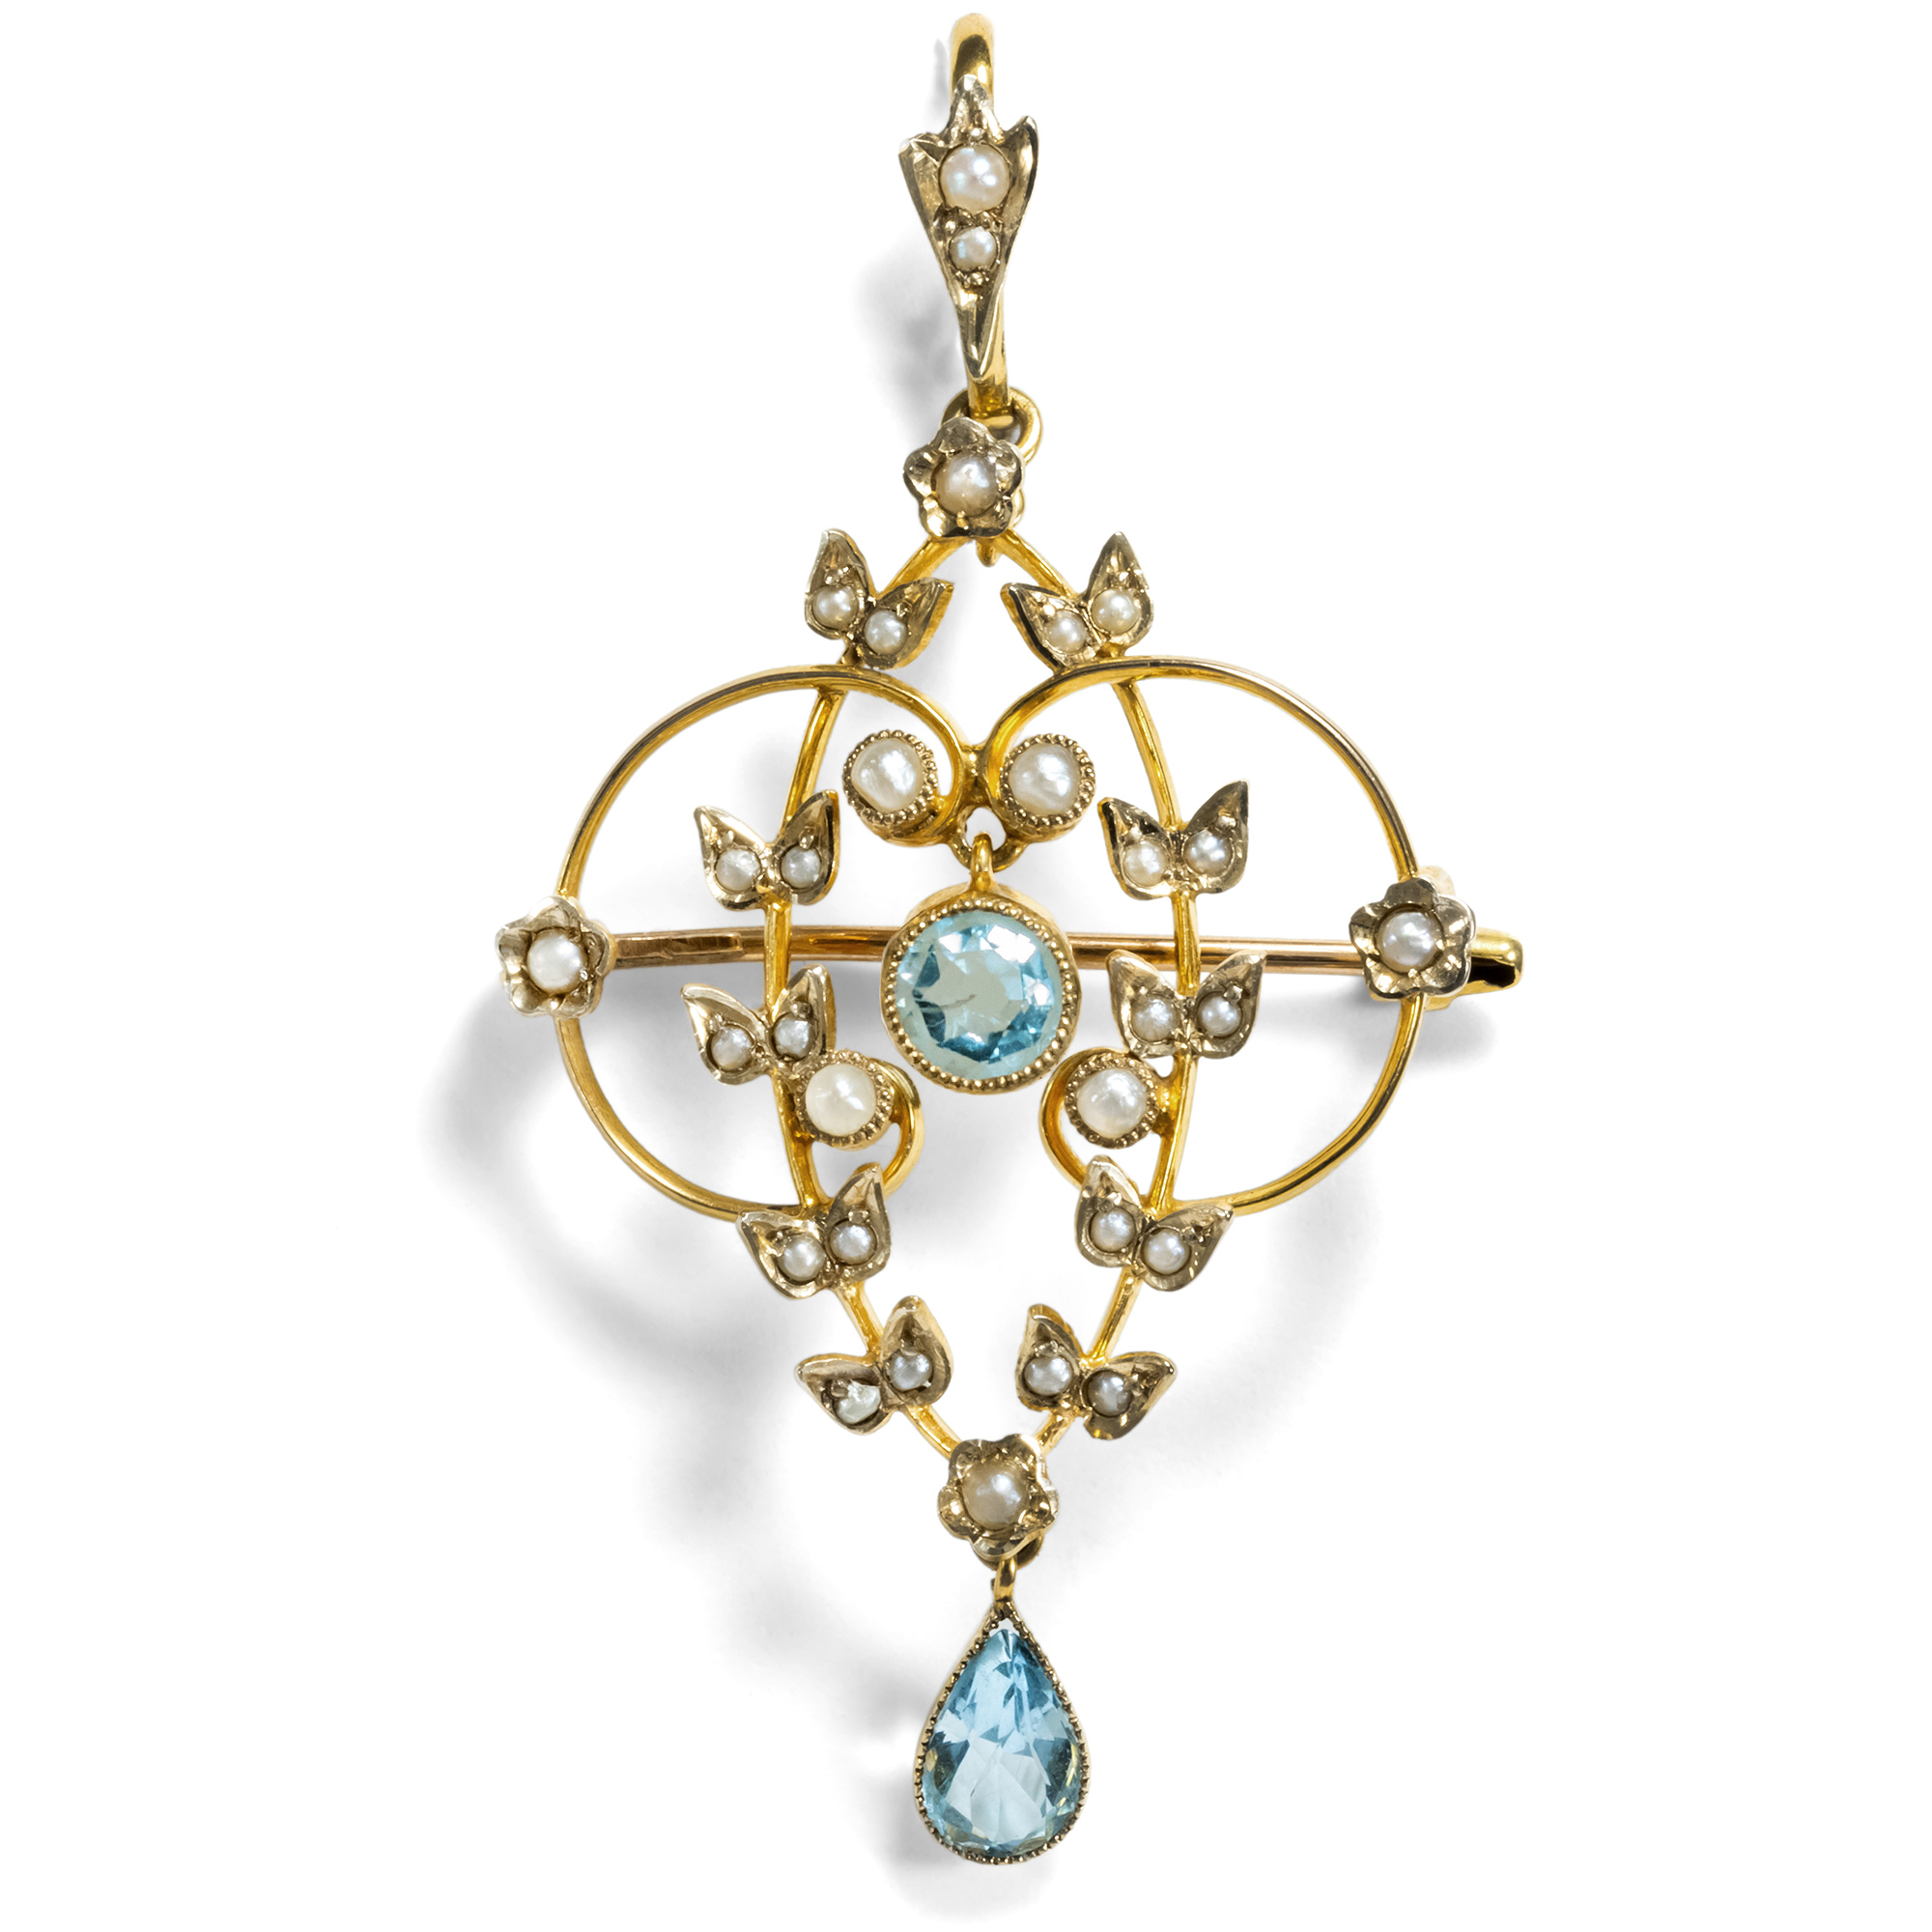 Delicate Pendant Brooch with Seed Pearls, England c. 1905